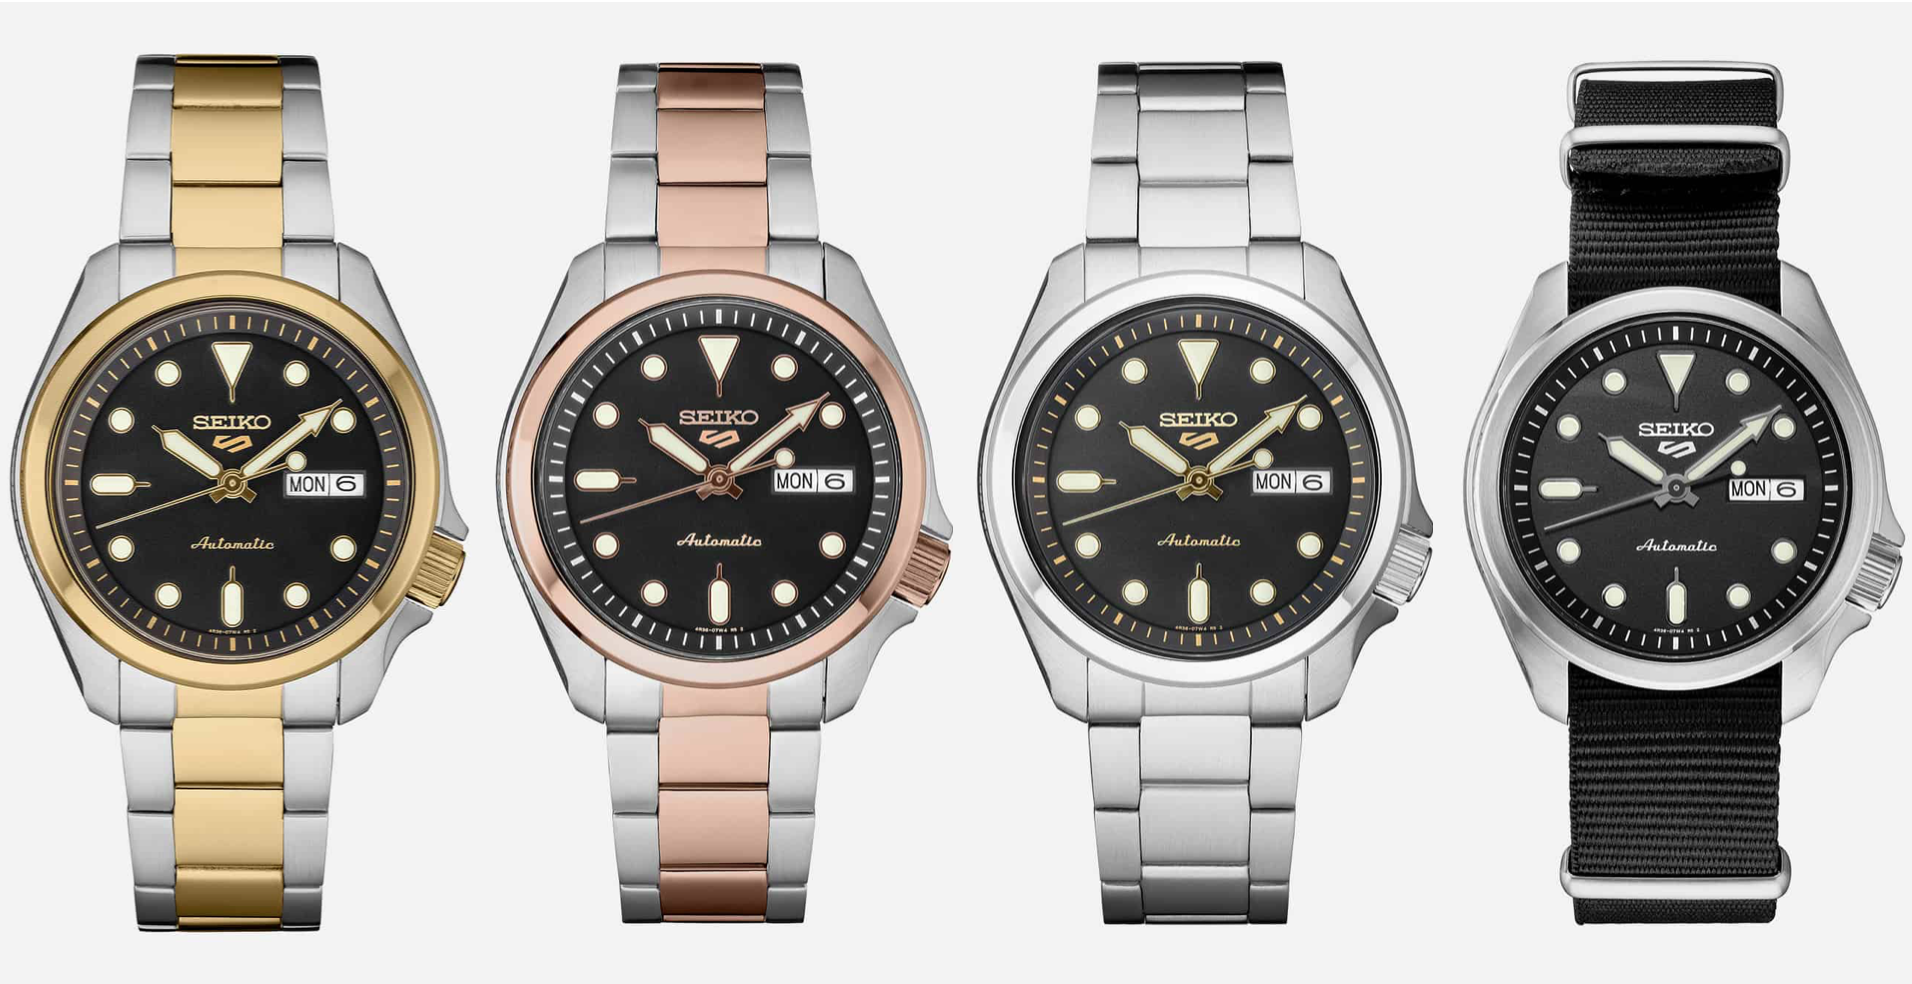 Seiko ditches ratcheting bezel for new Seiko 5 Sports models